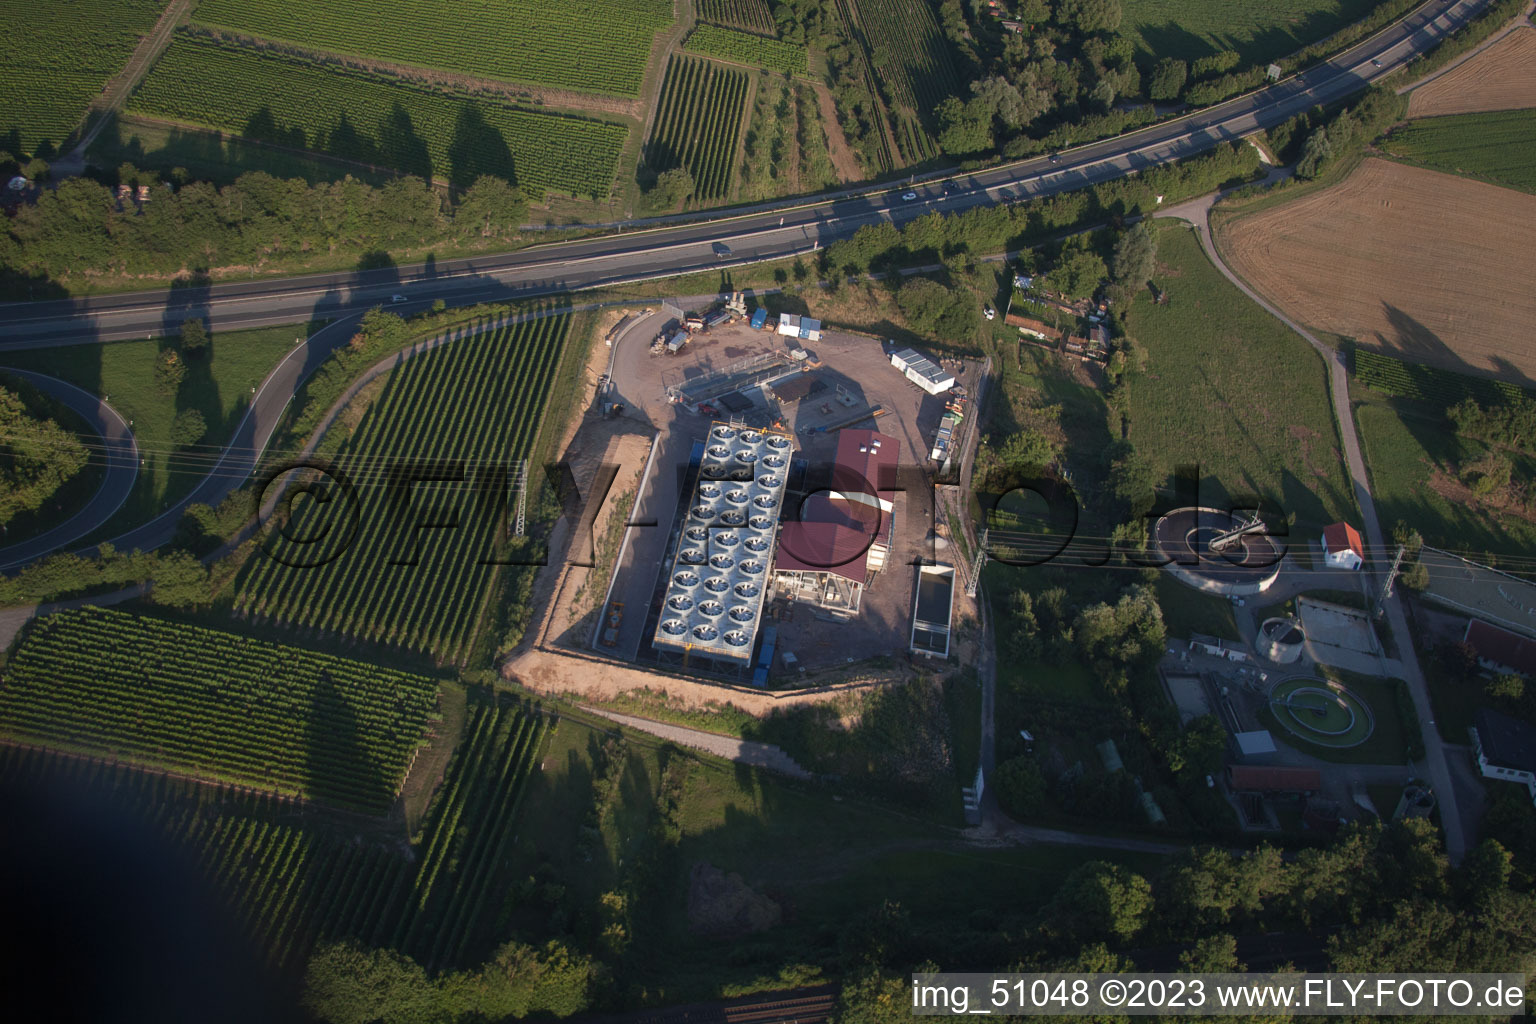 Geothermal energy plant from Pfalzwerke geofuture GmbH at Insheim on the A65 in Insheim in the state Rhineland-Palatinate, Germany from above